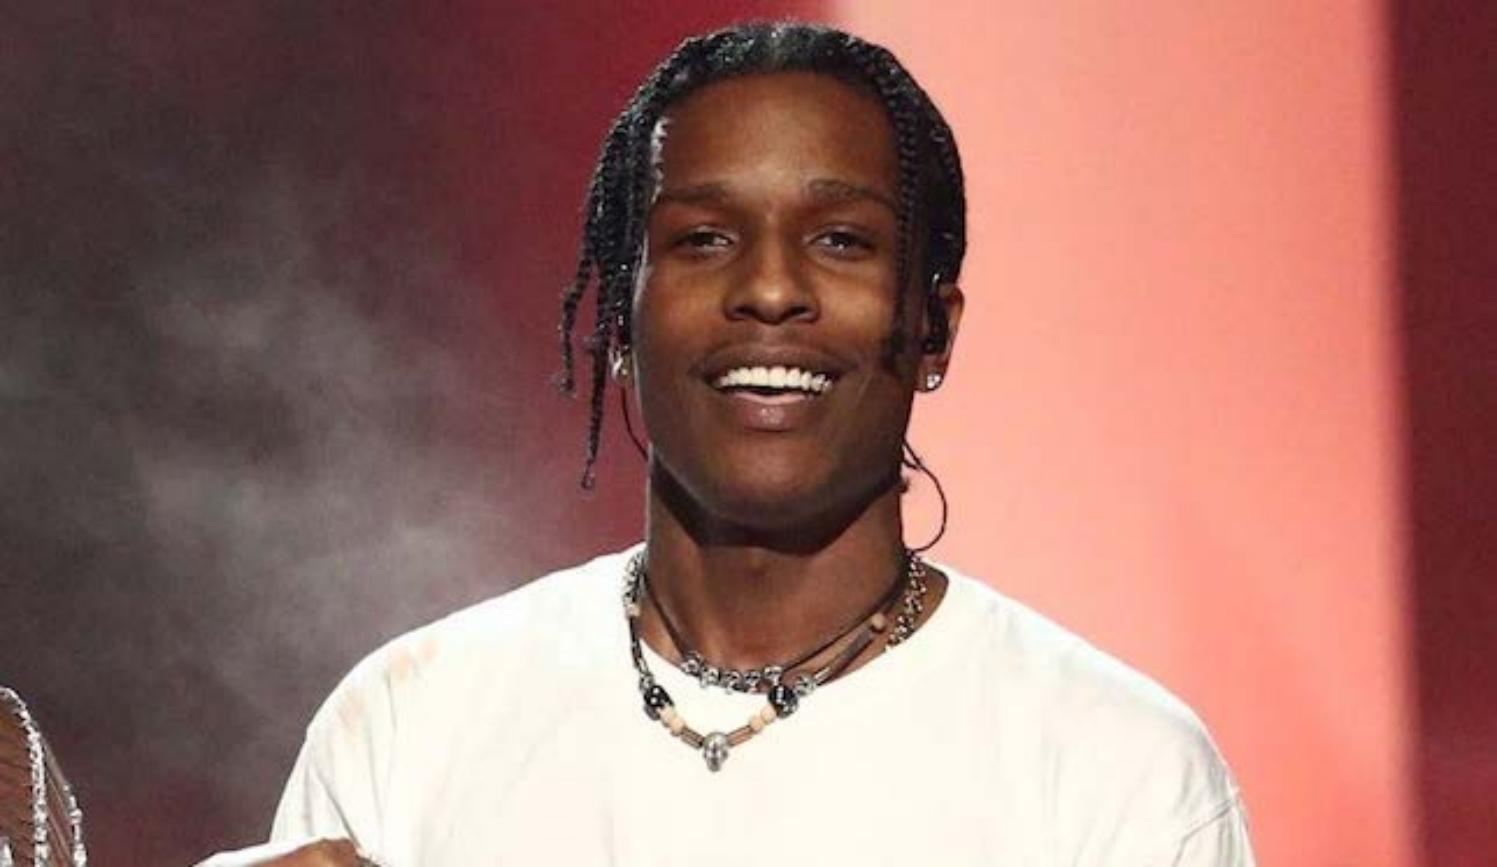 ASAP Rocky Net Worth (American Rapper, Songwriter, Producer and, Actor